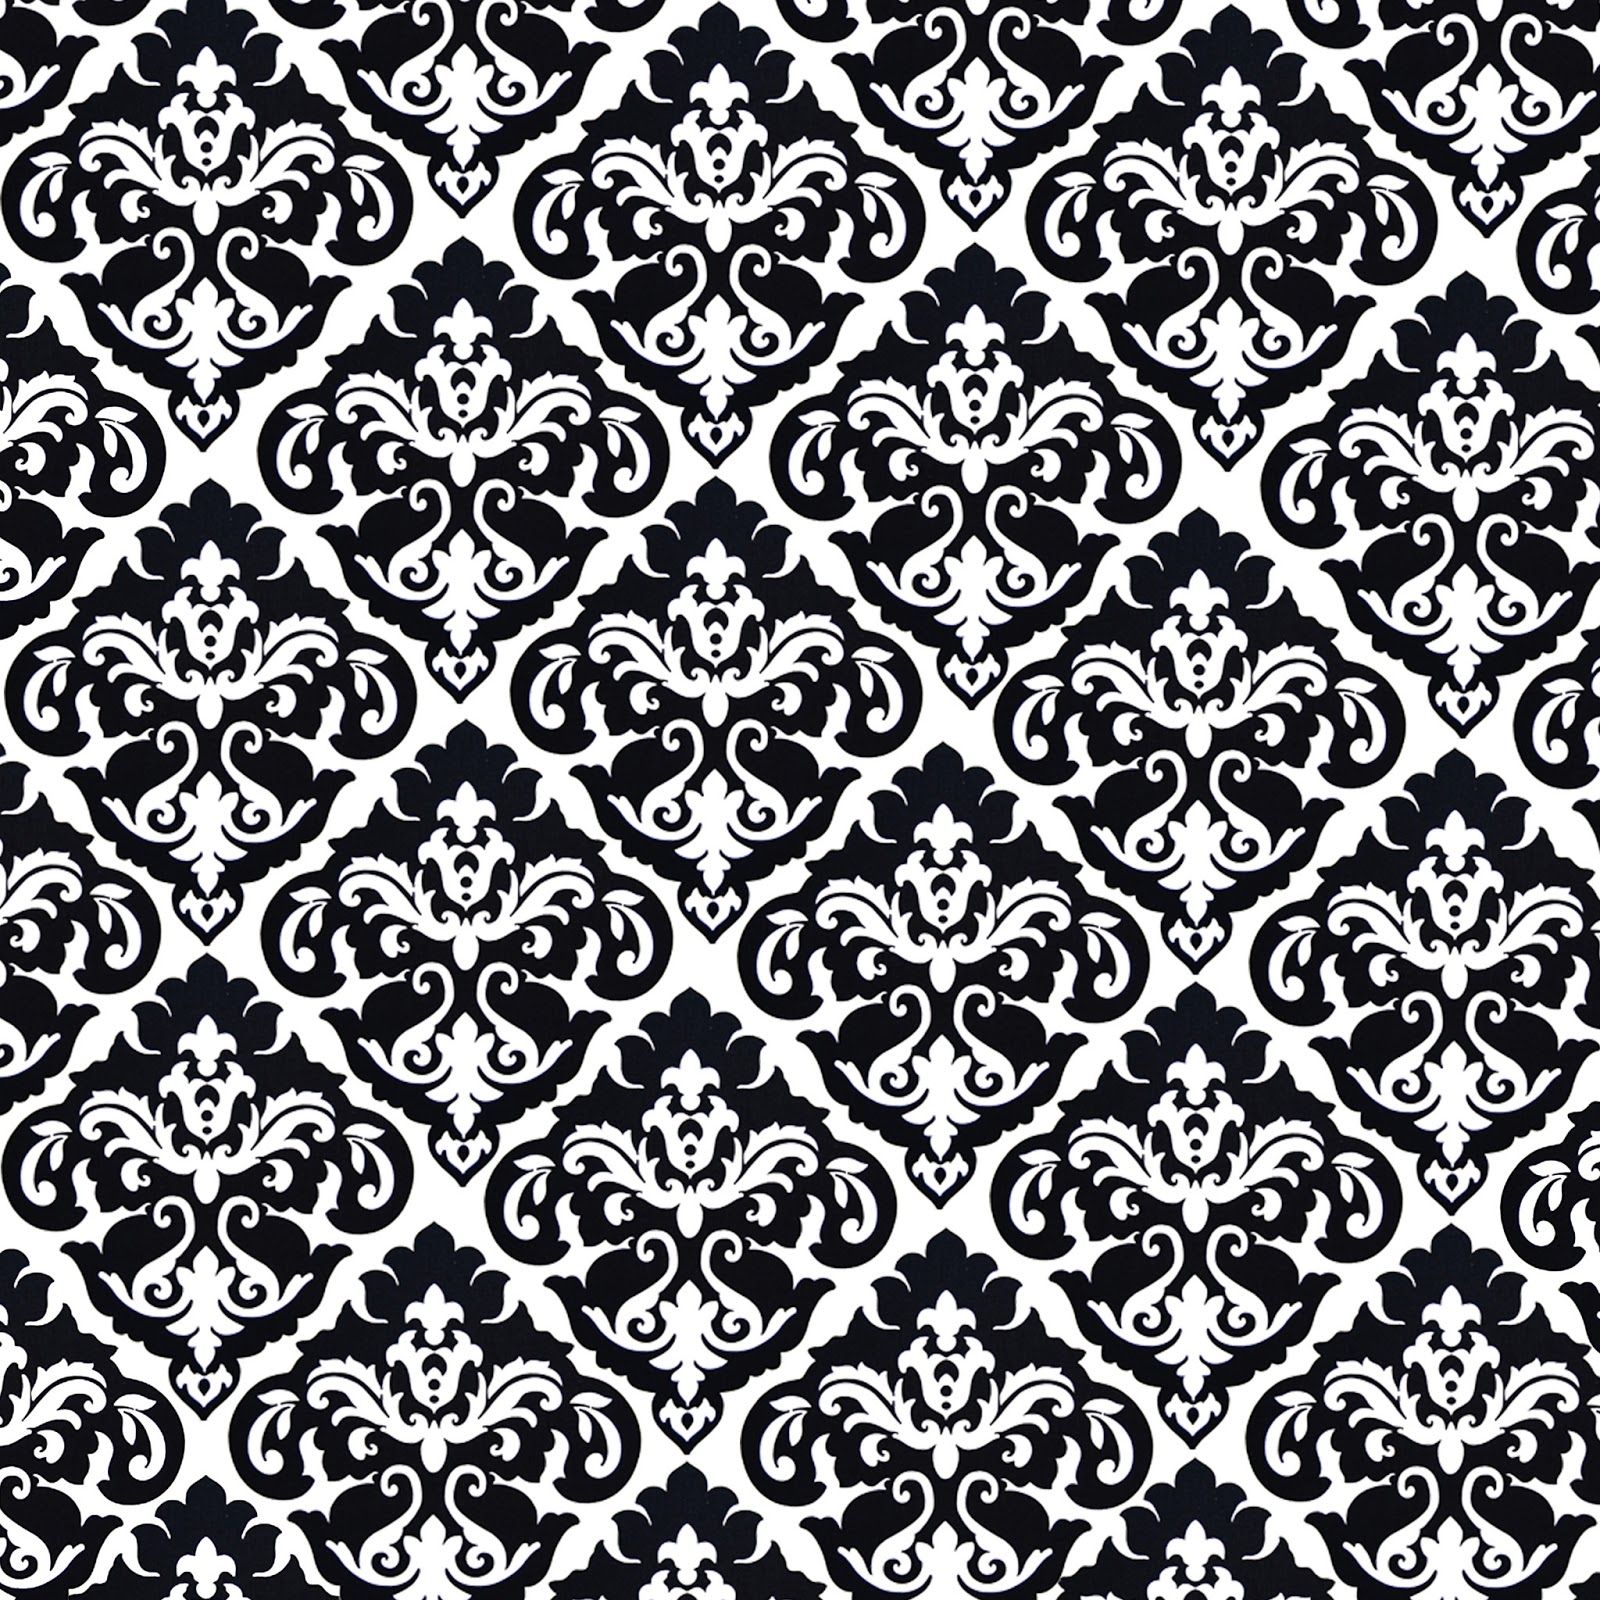 Black And White Damask Pattern Wallpaperawsome Backgrounds Wallpapers 1600x1600